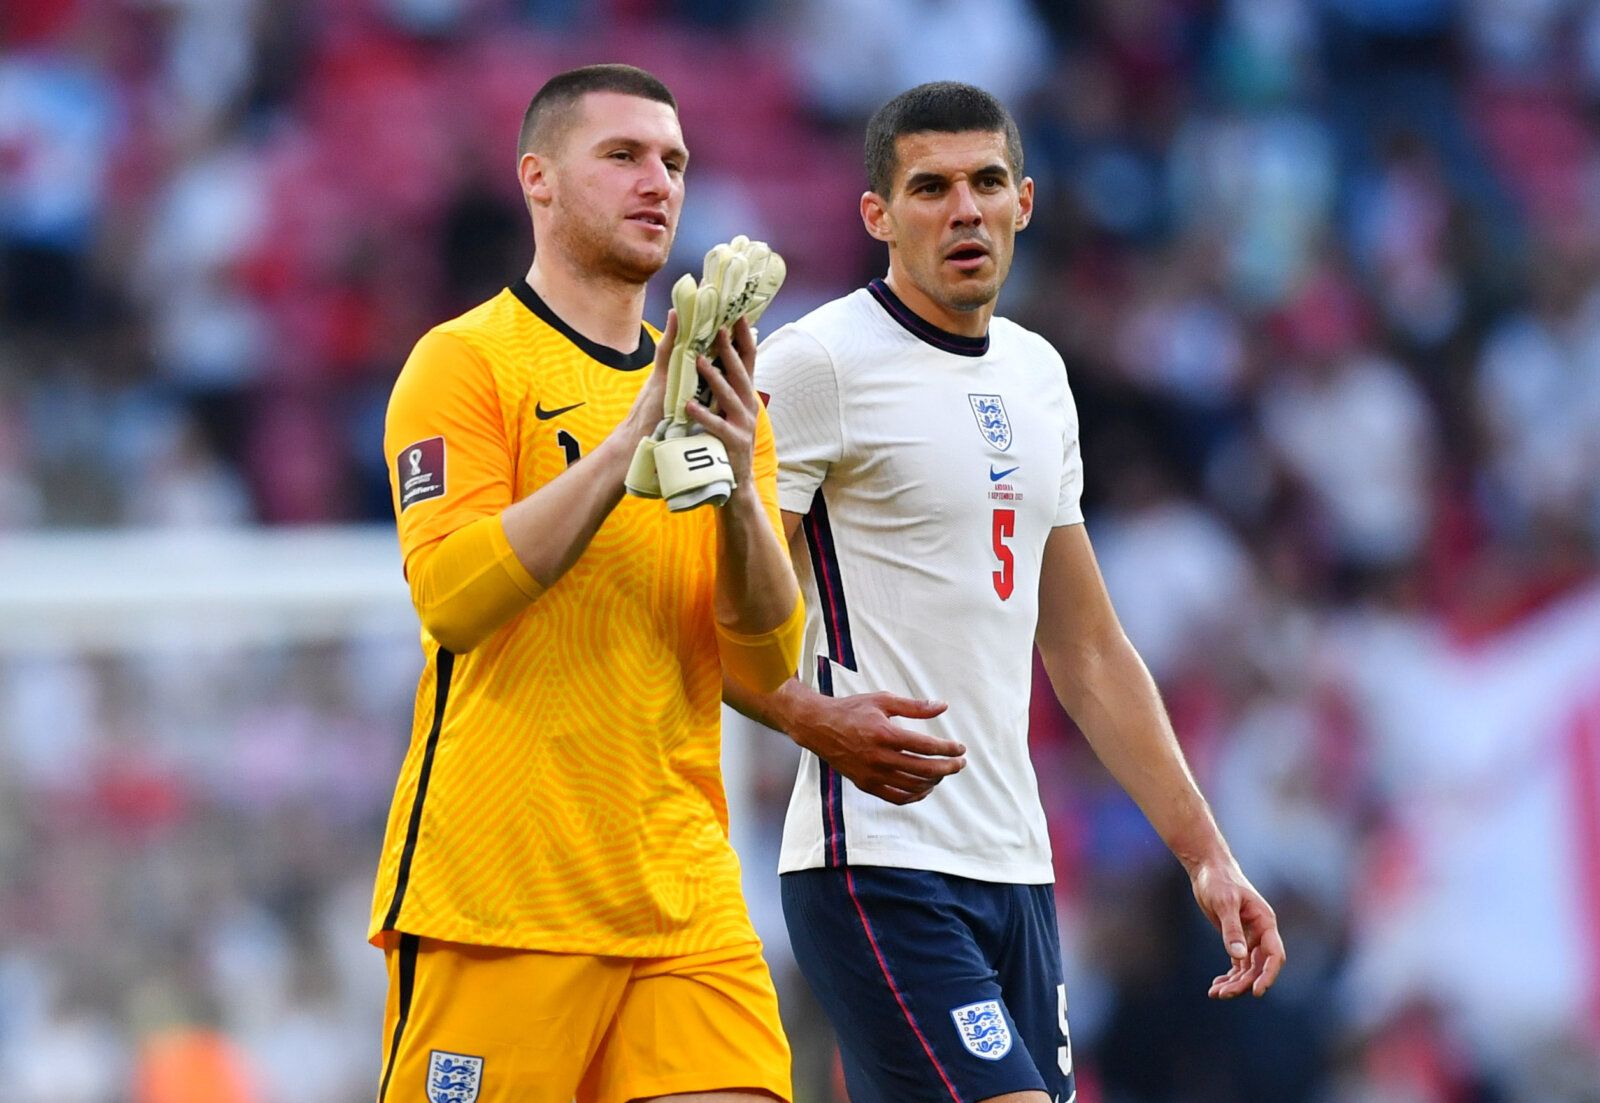 Soccer Football - World Cup - UEFA Qualifiers - Group I - England v Andorra - Wembley Stadium, London, Britain - September 5, 2021  England's Sam Johnstone celebrates with Conor Coady after the match REUTERS/Dylan Martinez